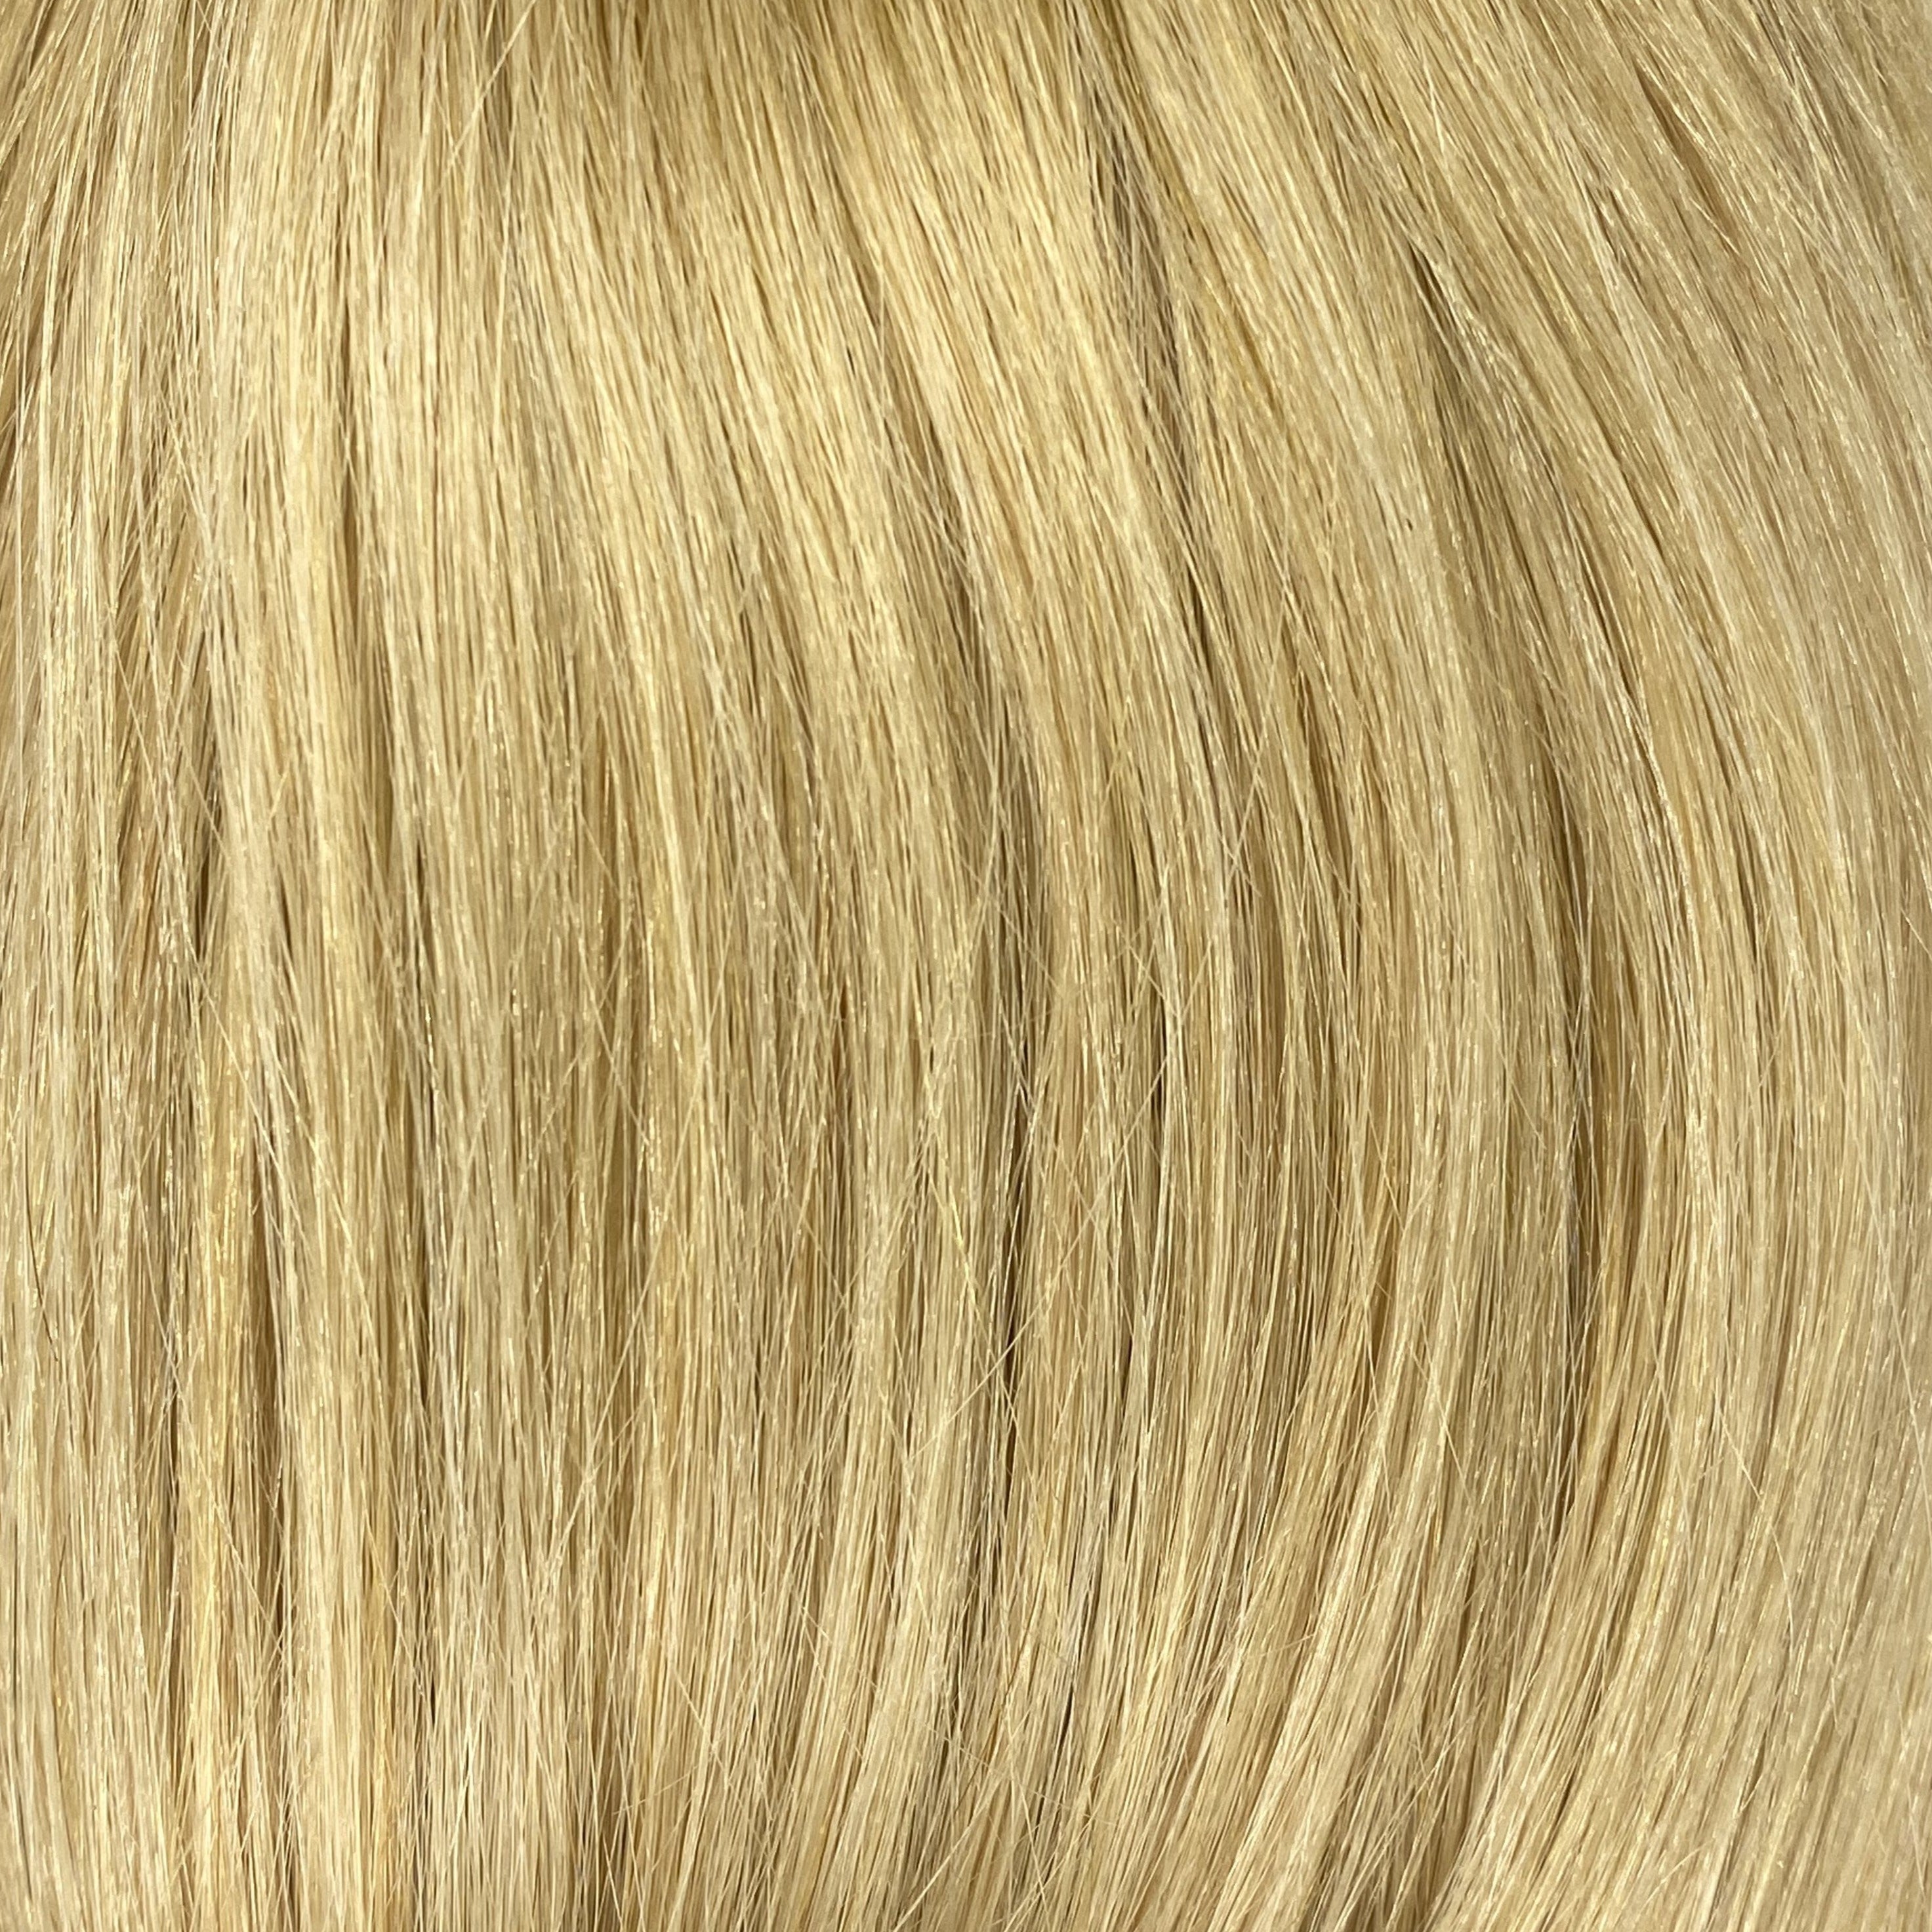 Velo Sale #6&16 - 20 inches - Copper Golden Blonde into Light Golden Blonde Ombre - Image 2